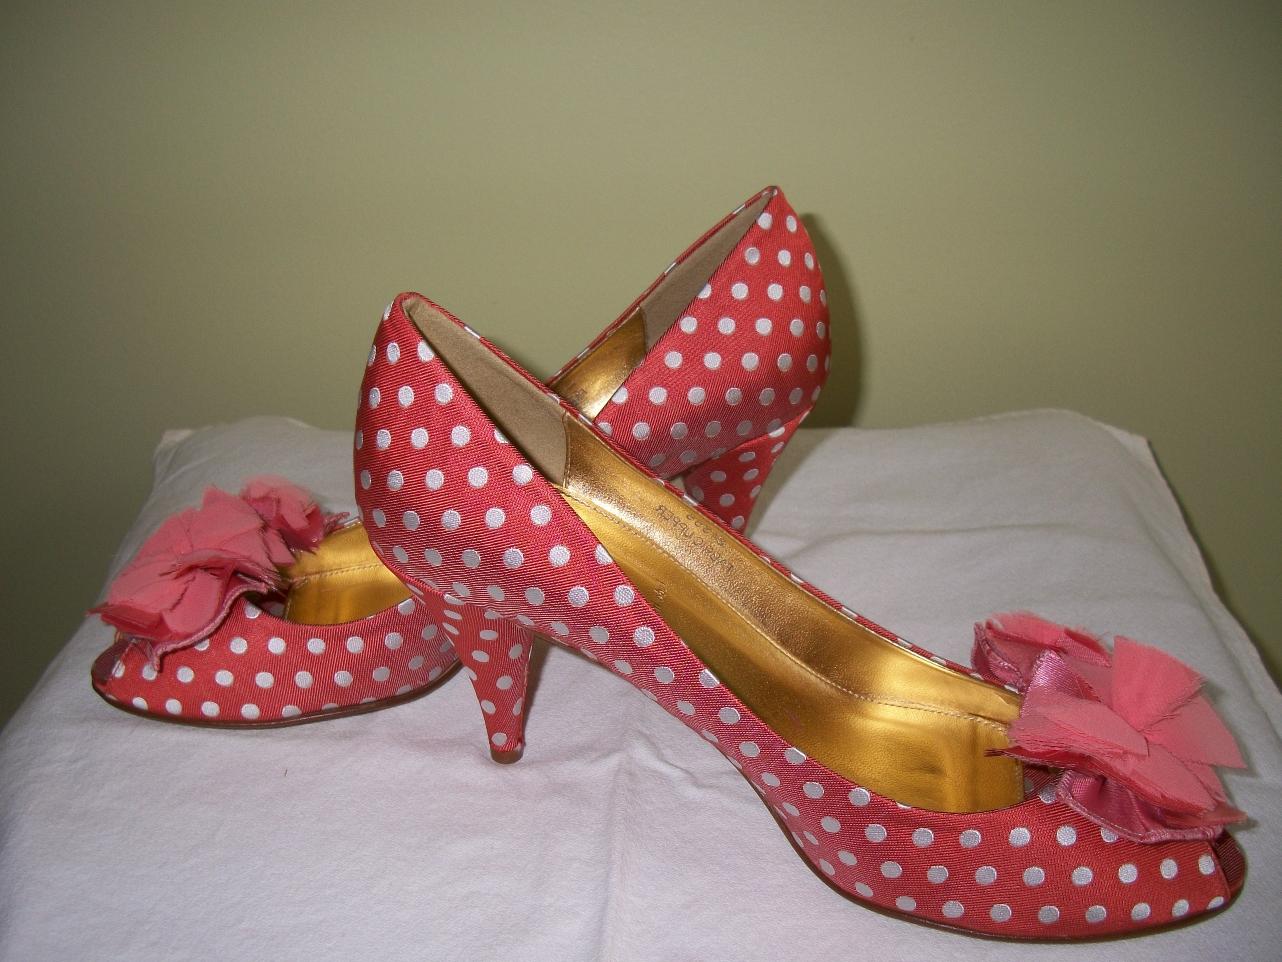 I got a nice little email with these adorable wedding shoes from Gretchen at